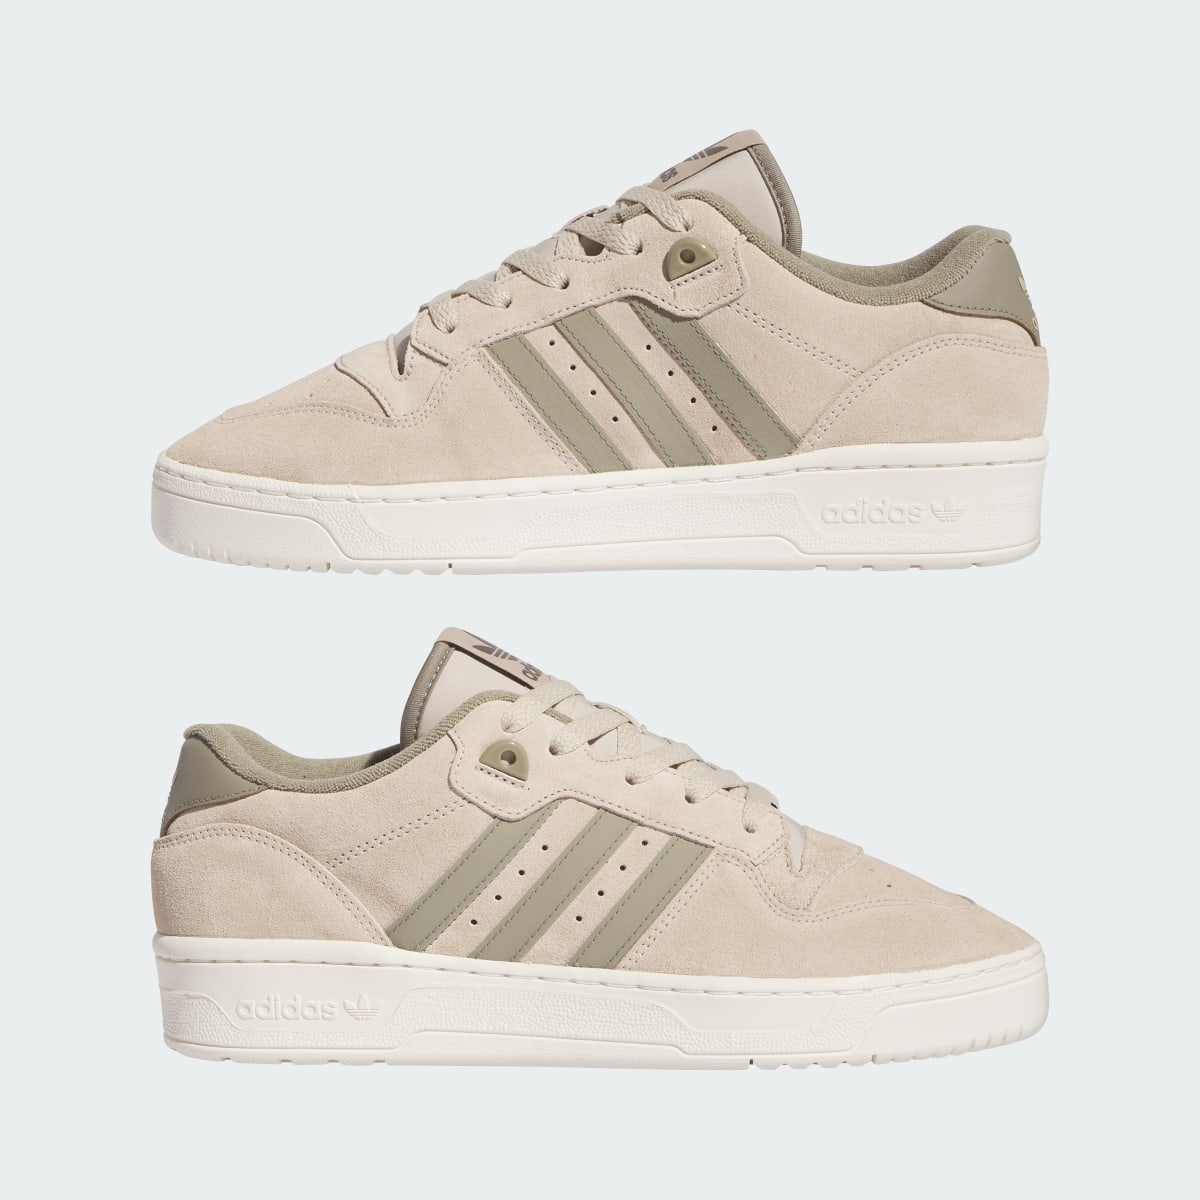 Adidas Chaussure Rivalry Low. 8